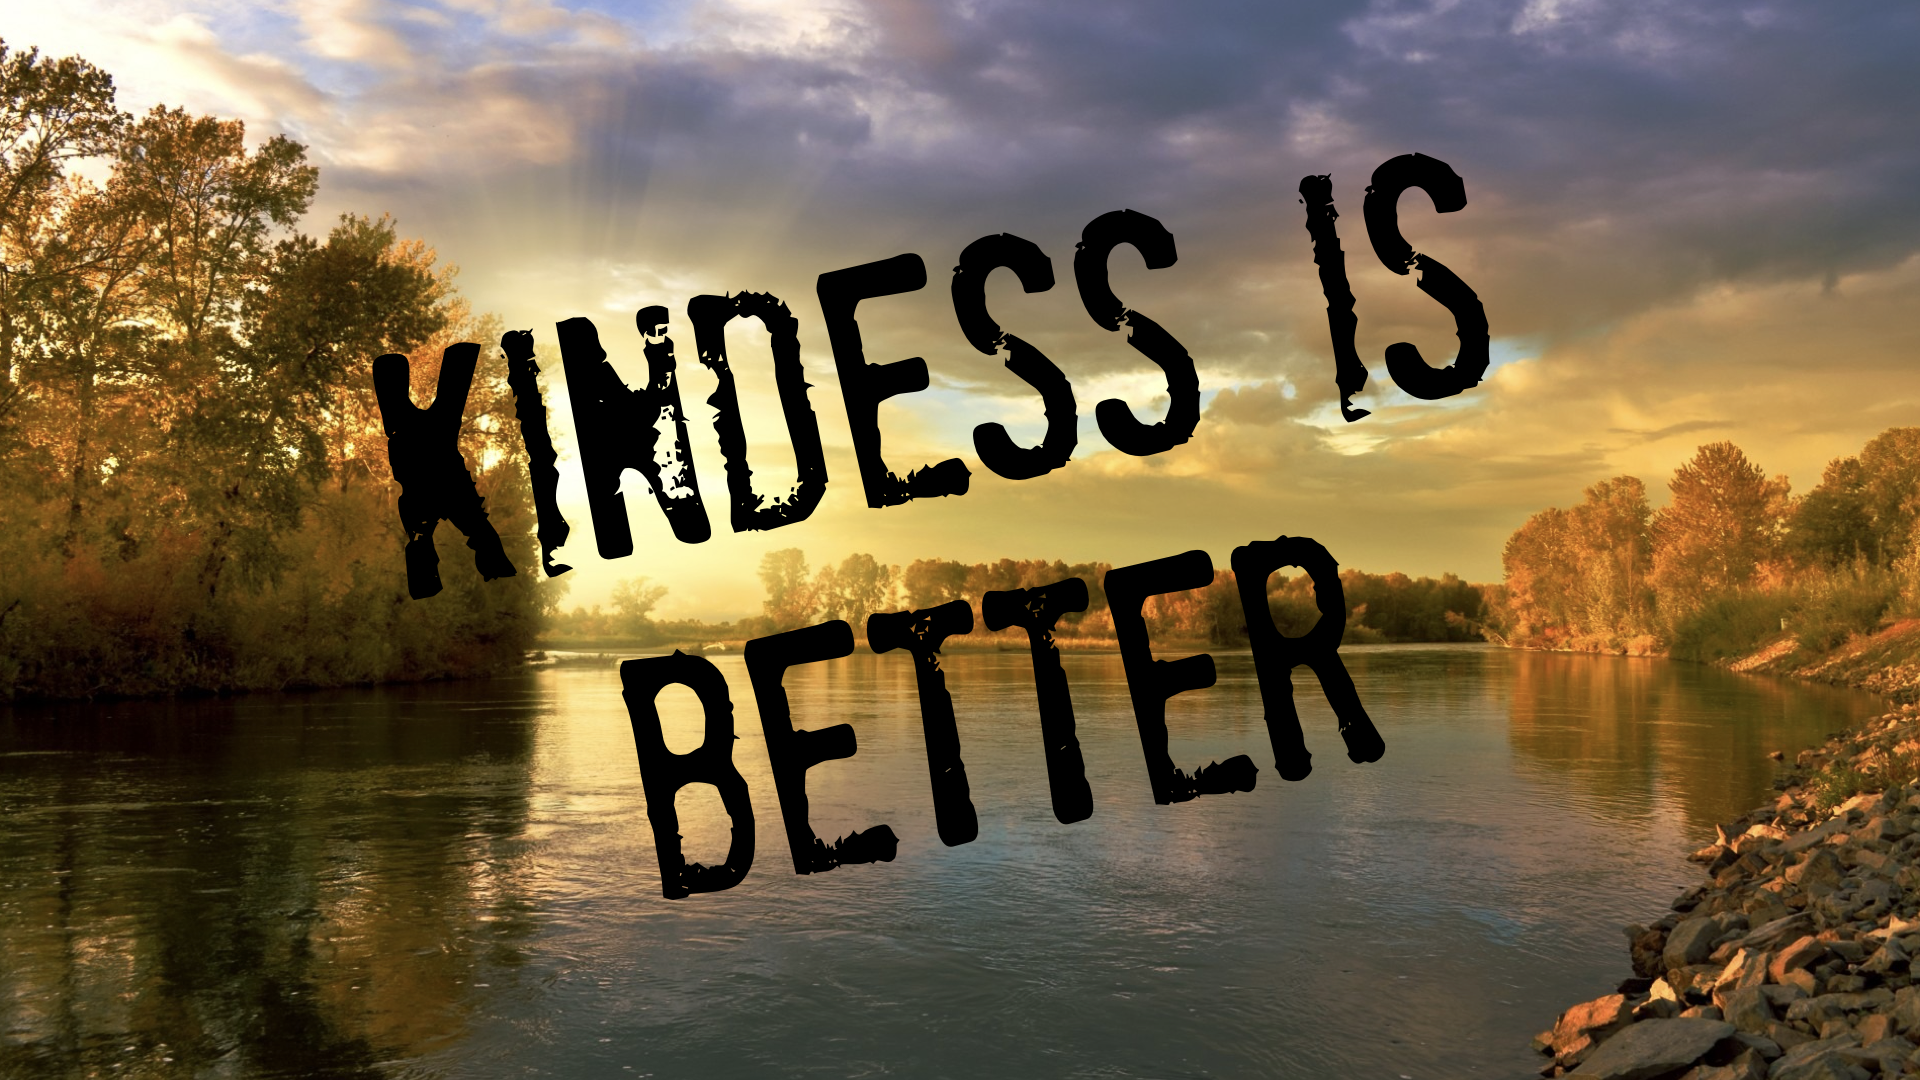 Kindness is better